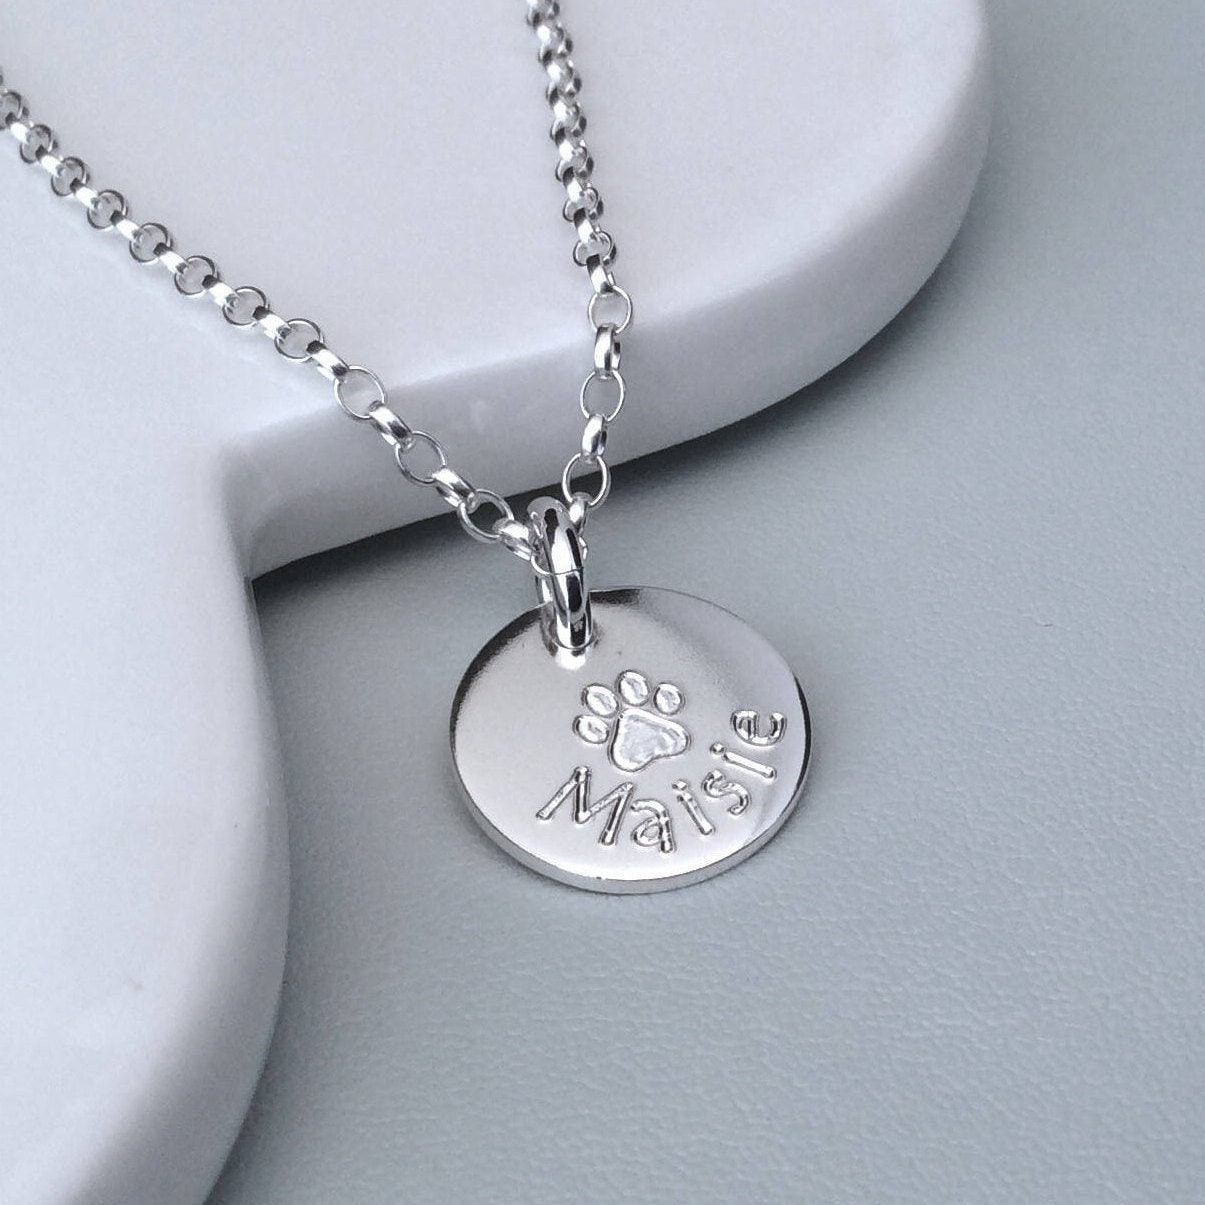 Paw print necklace engraved in sterling silver